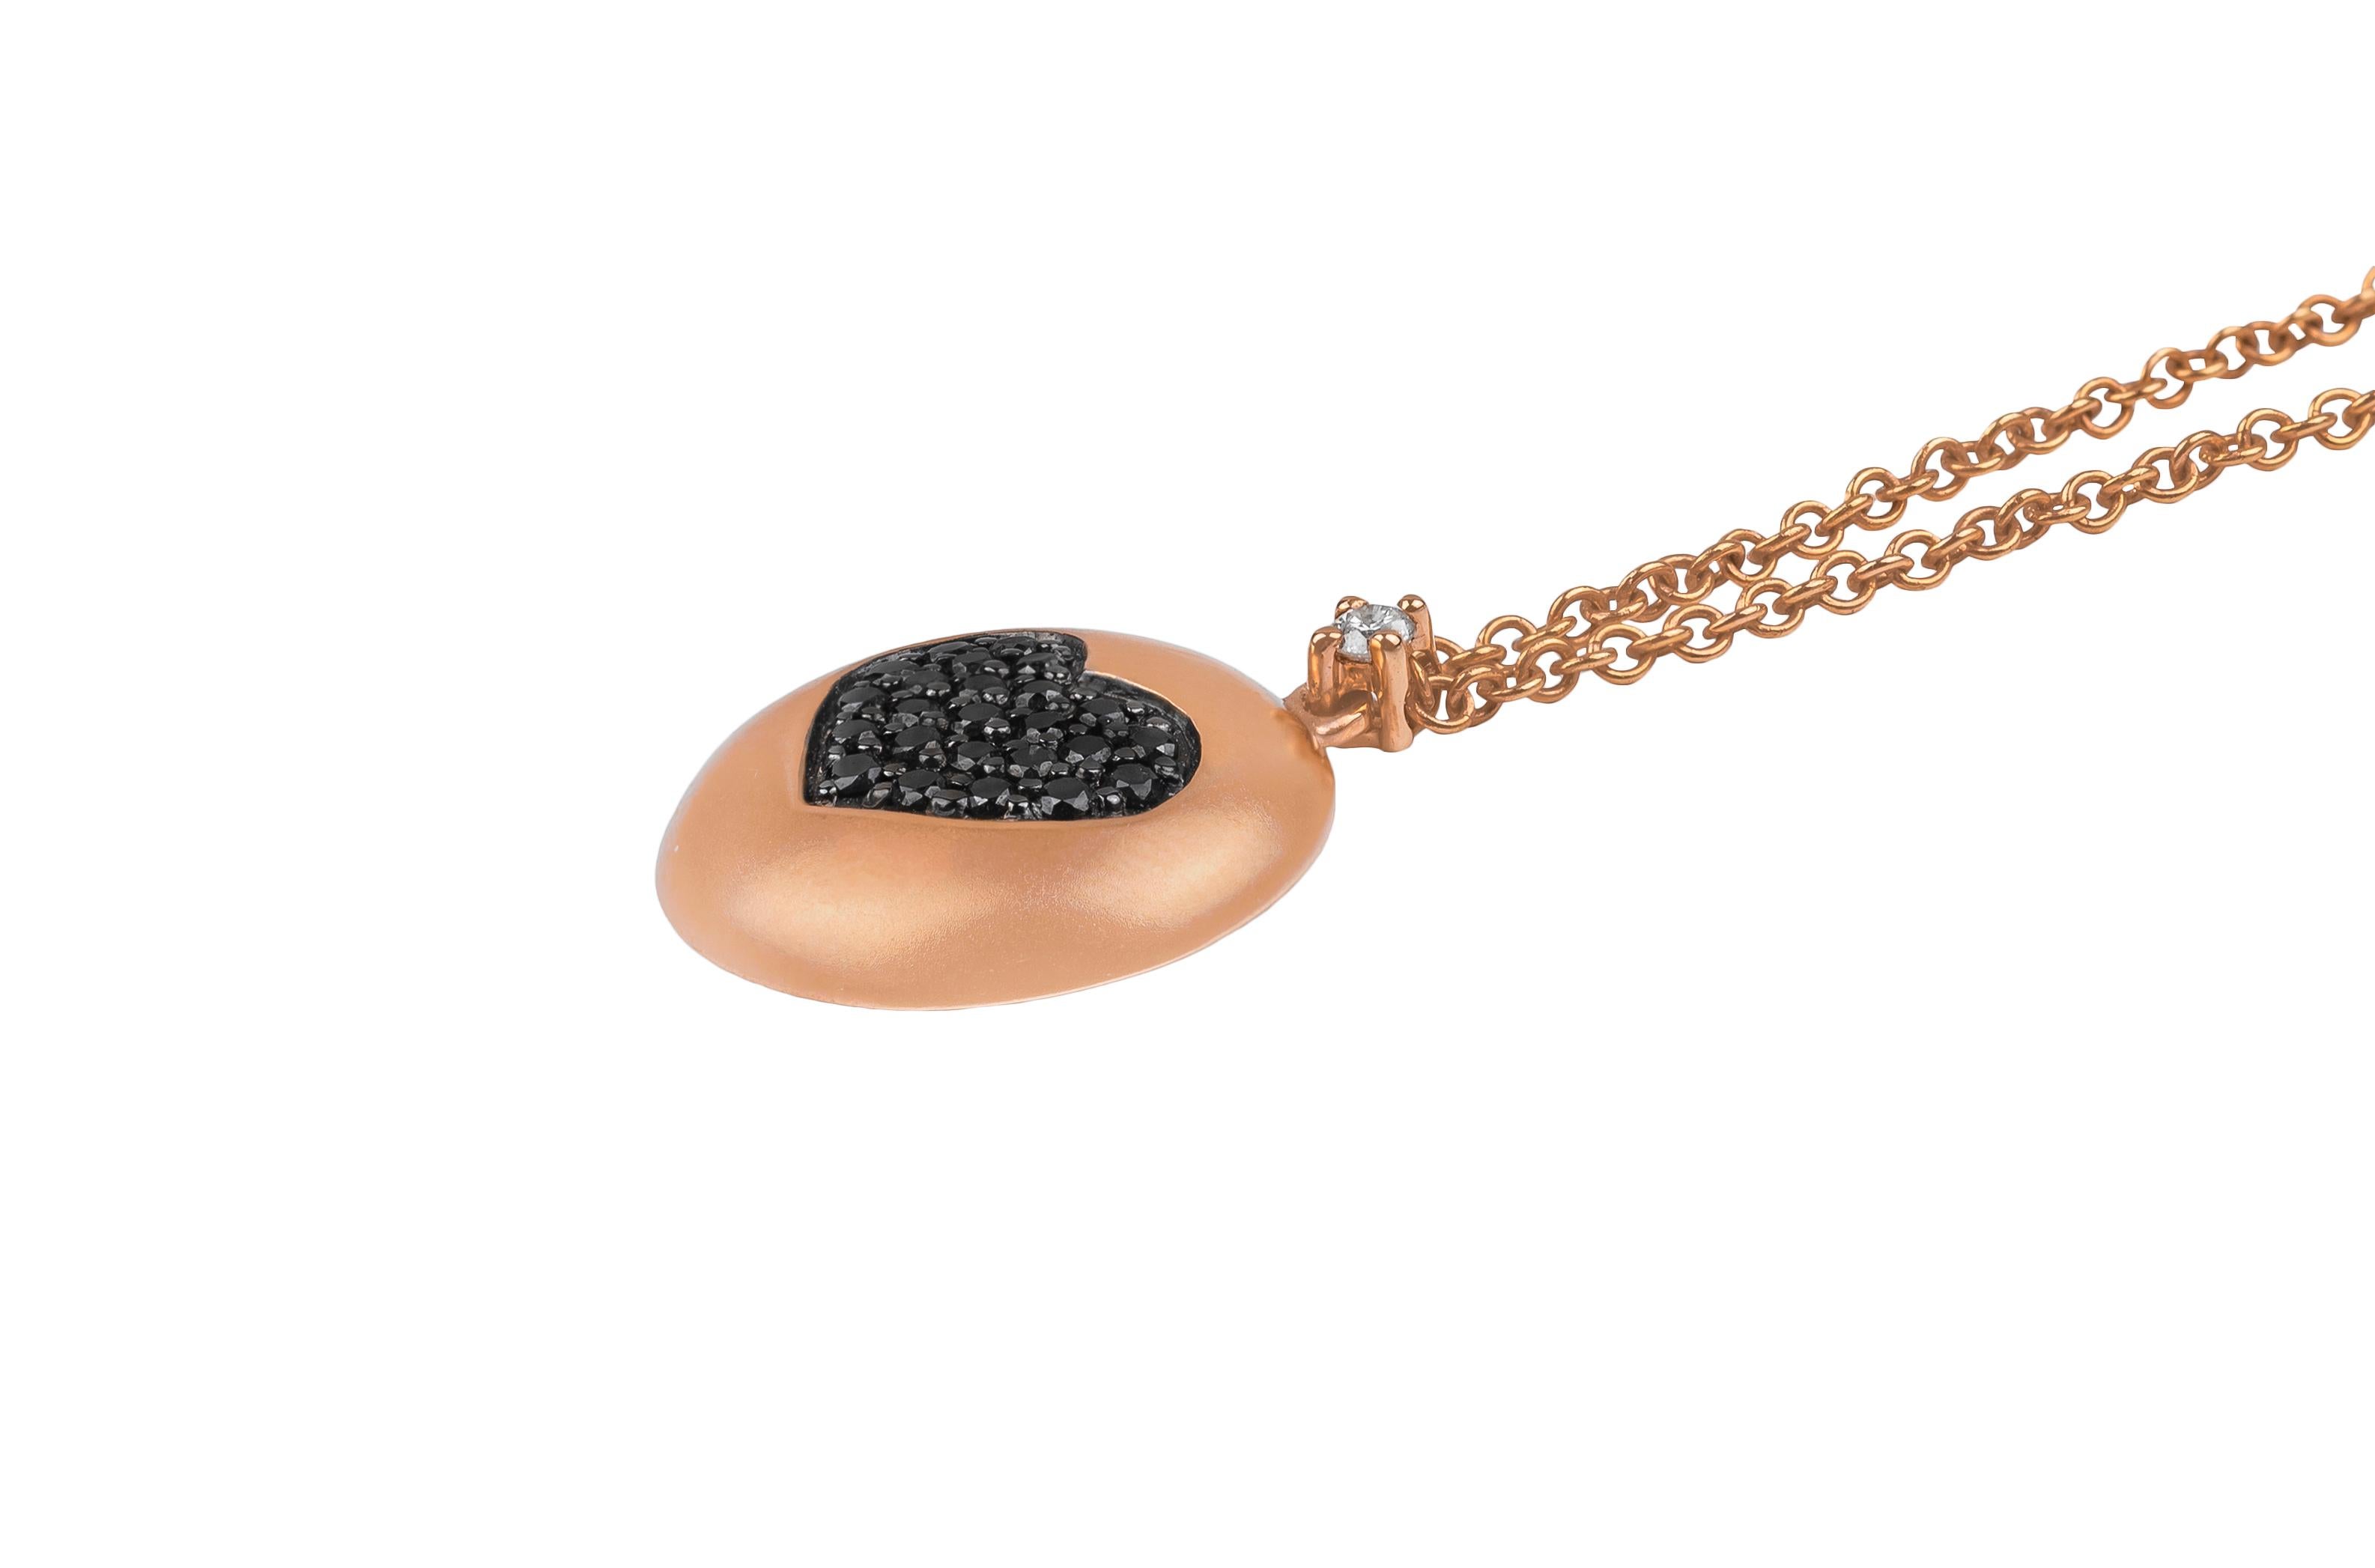 This elegant 18K rose gold necklace is a perfect romantic gift made in Italy by Fanuele Gioielli.
It features a matte rose gold round pendant with a heart paved of brilliant cut black diamonds.
Two rings at the end of the chain allow to adjust it to